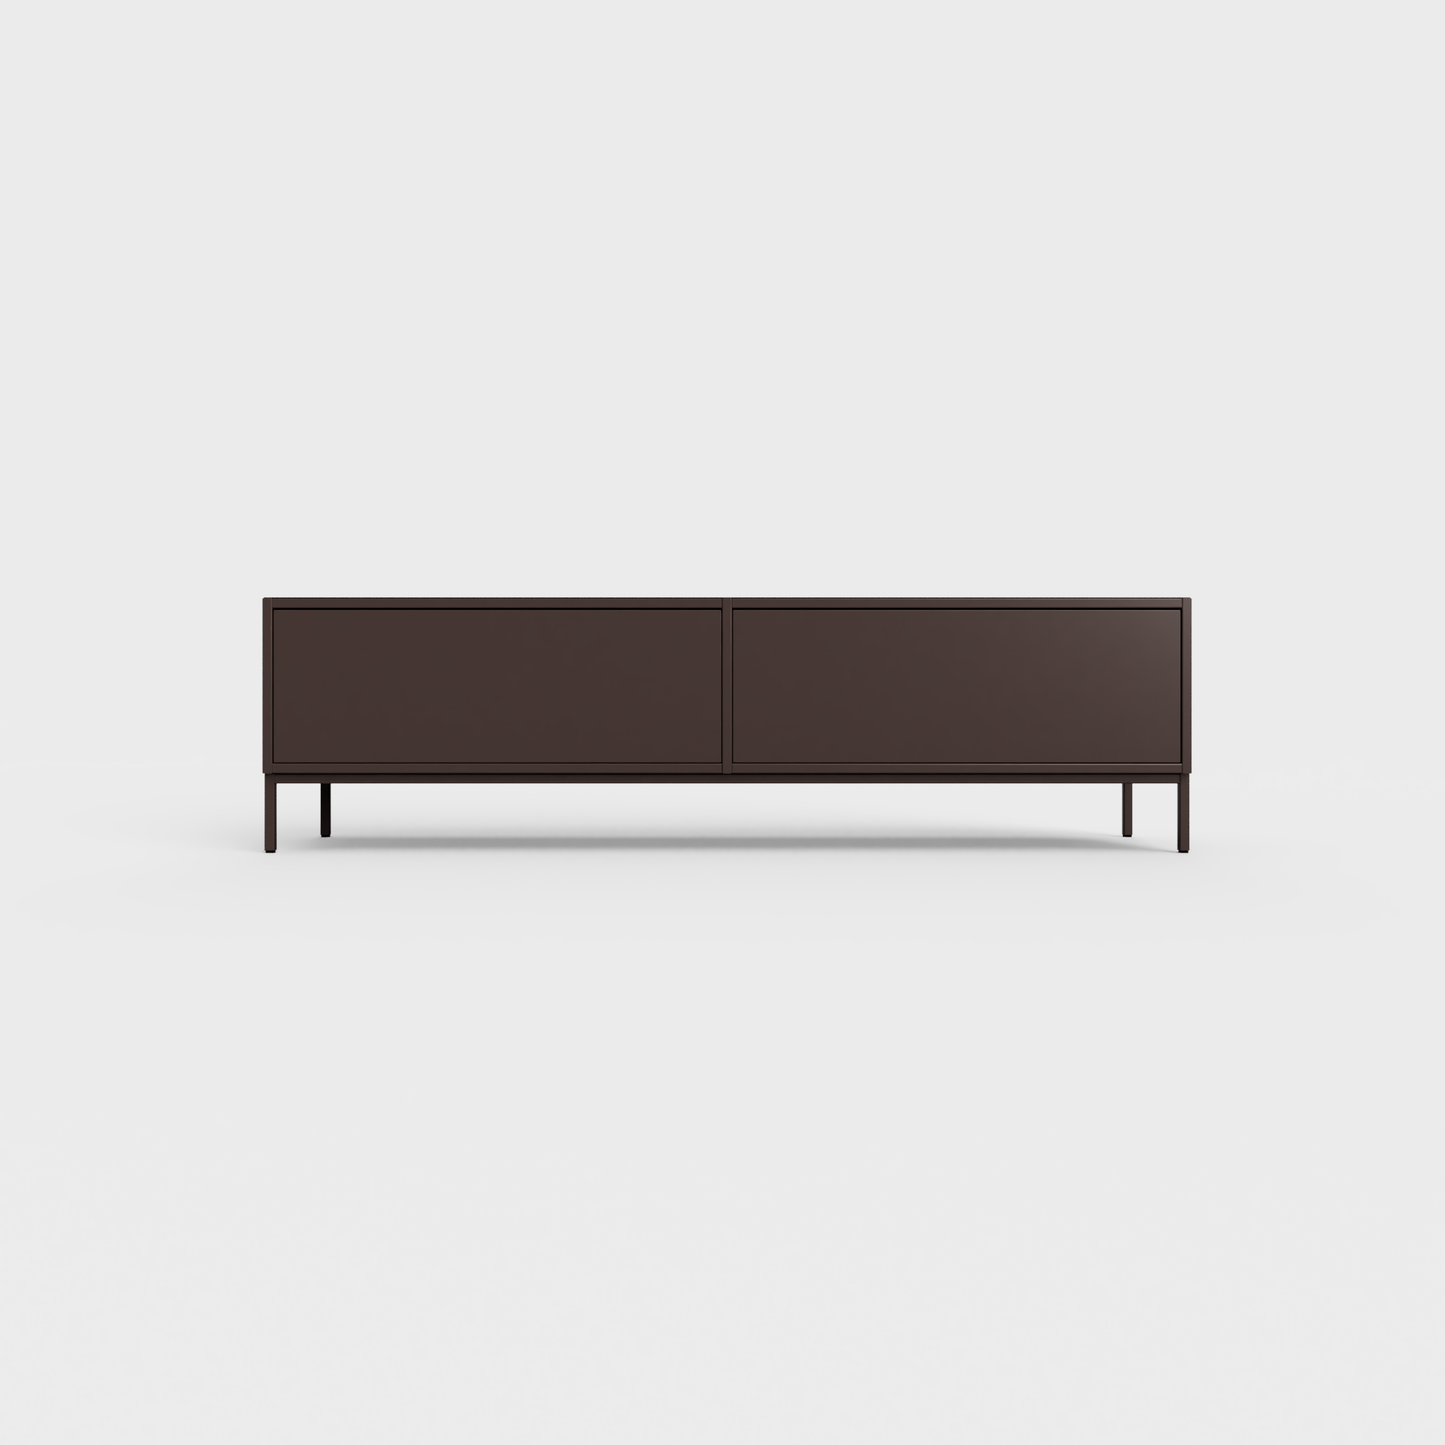 Prunus 01 Lowboard in Coffee color, powder-coated steel, elegant and modern piece of furniture for your living room